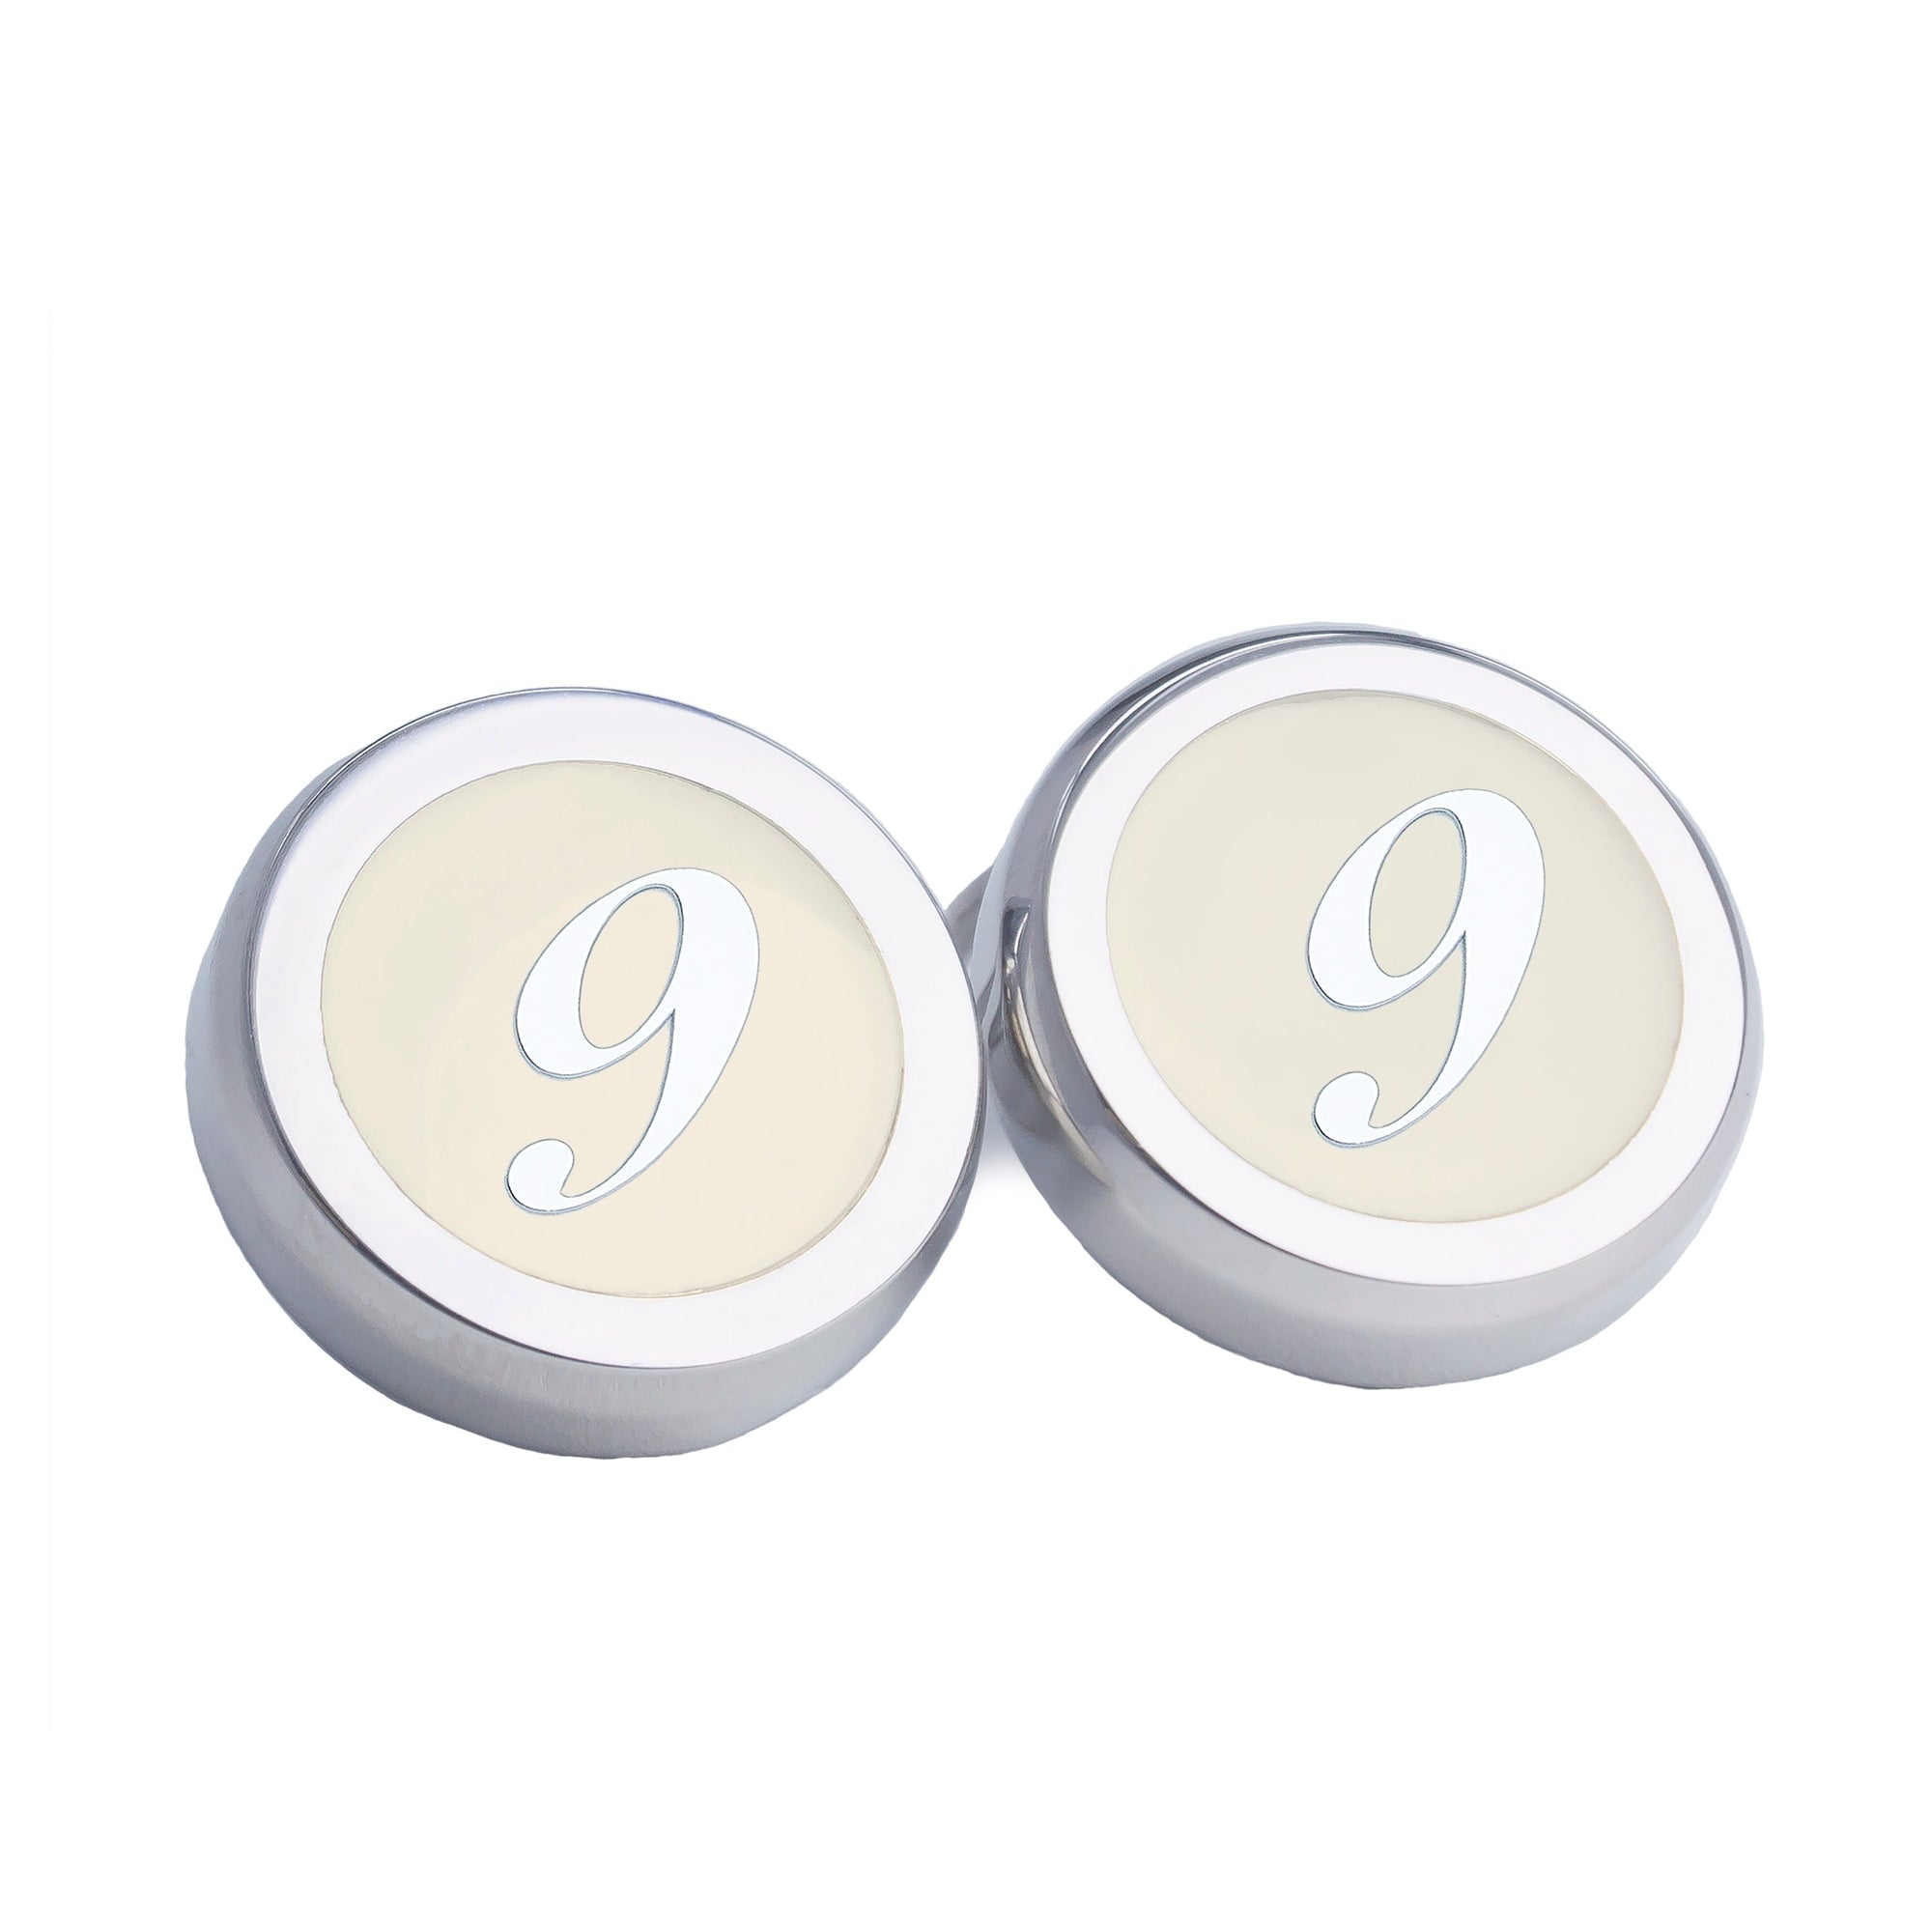 Numbers Silver Clip-On Button Covers-Button Covers-A.Azthom-9-Cufflinks.com.sg